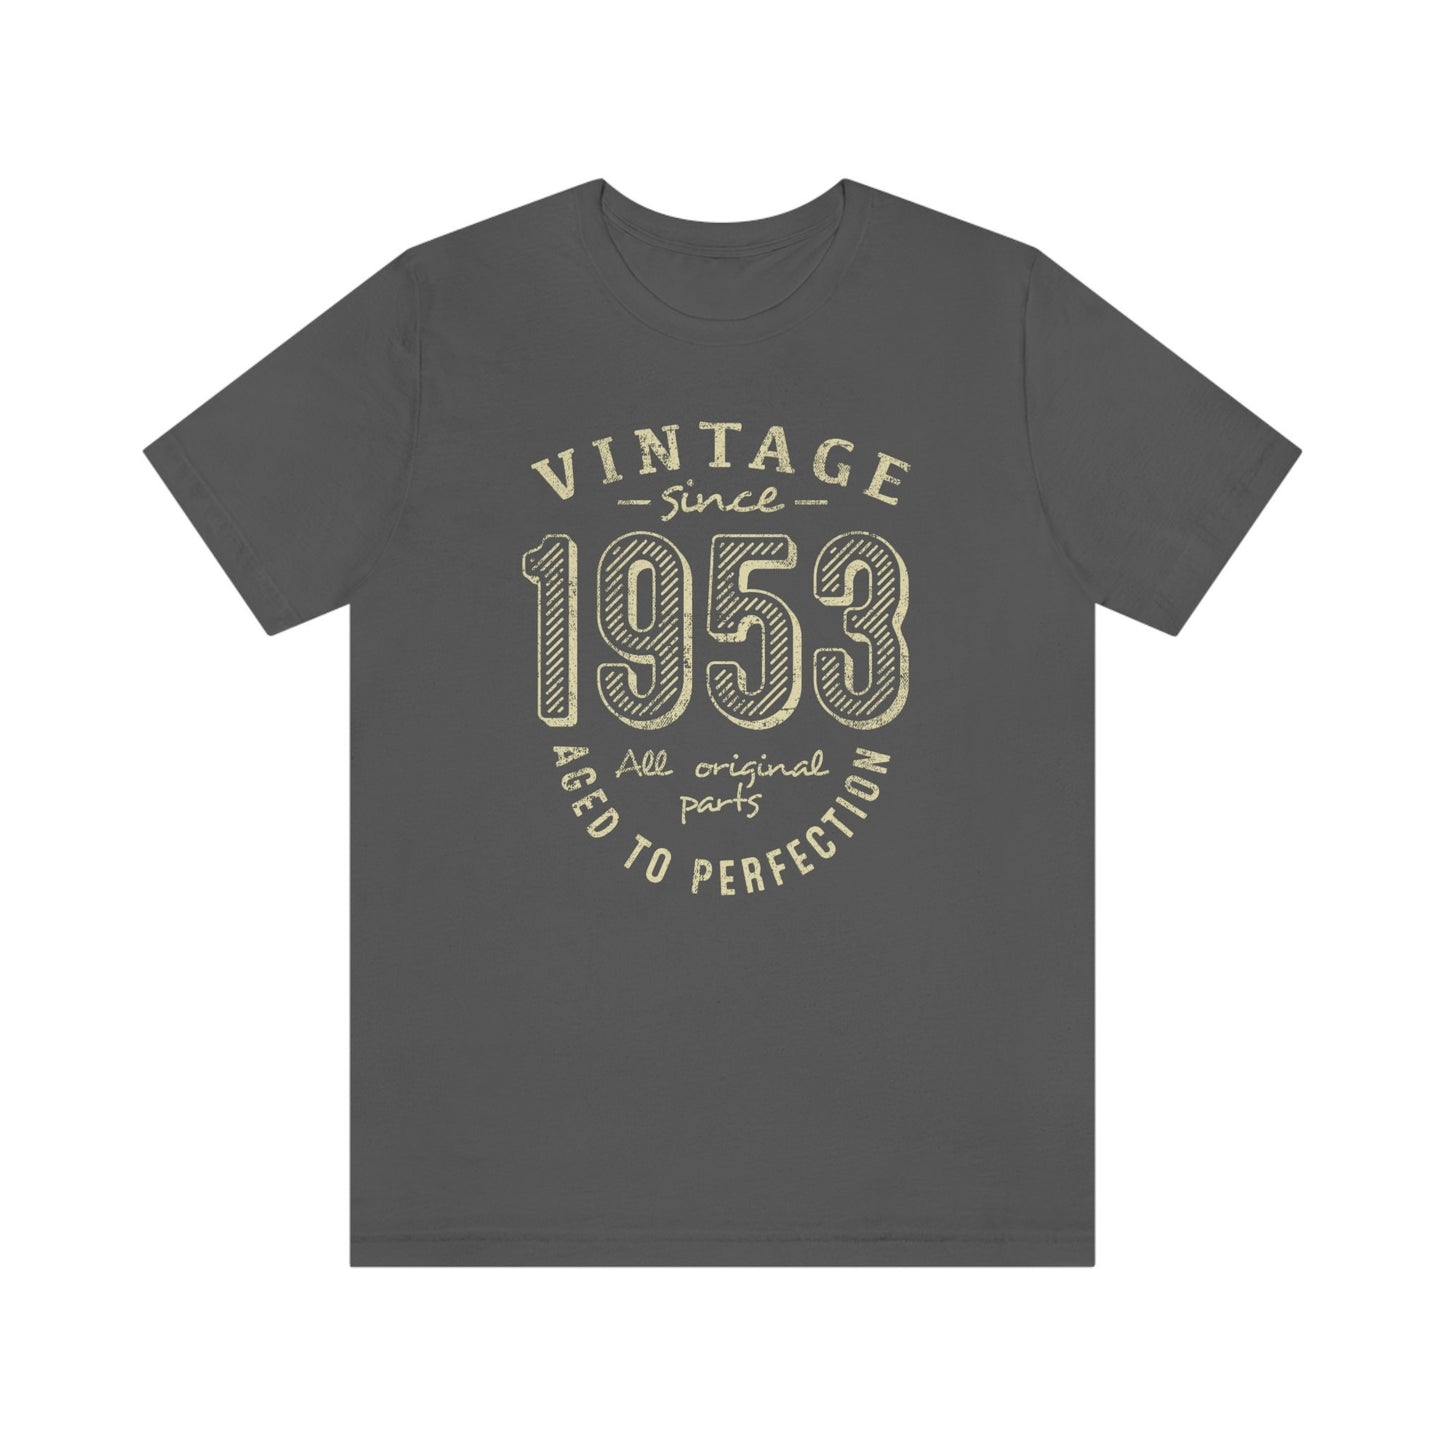 Vintage Since 1953 Birthday Shirt for Women or Men, Gift shirt for Wife or Husband